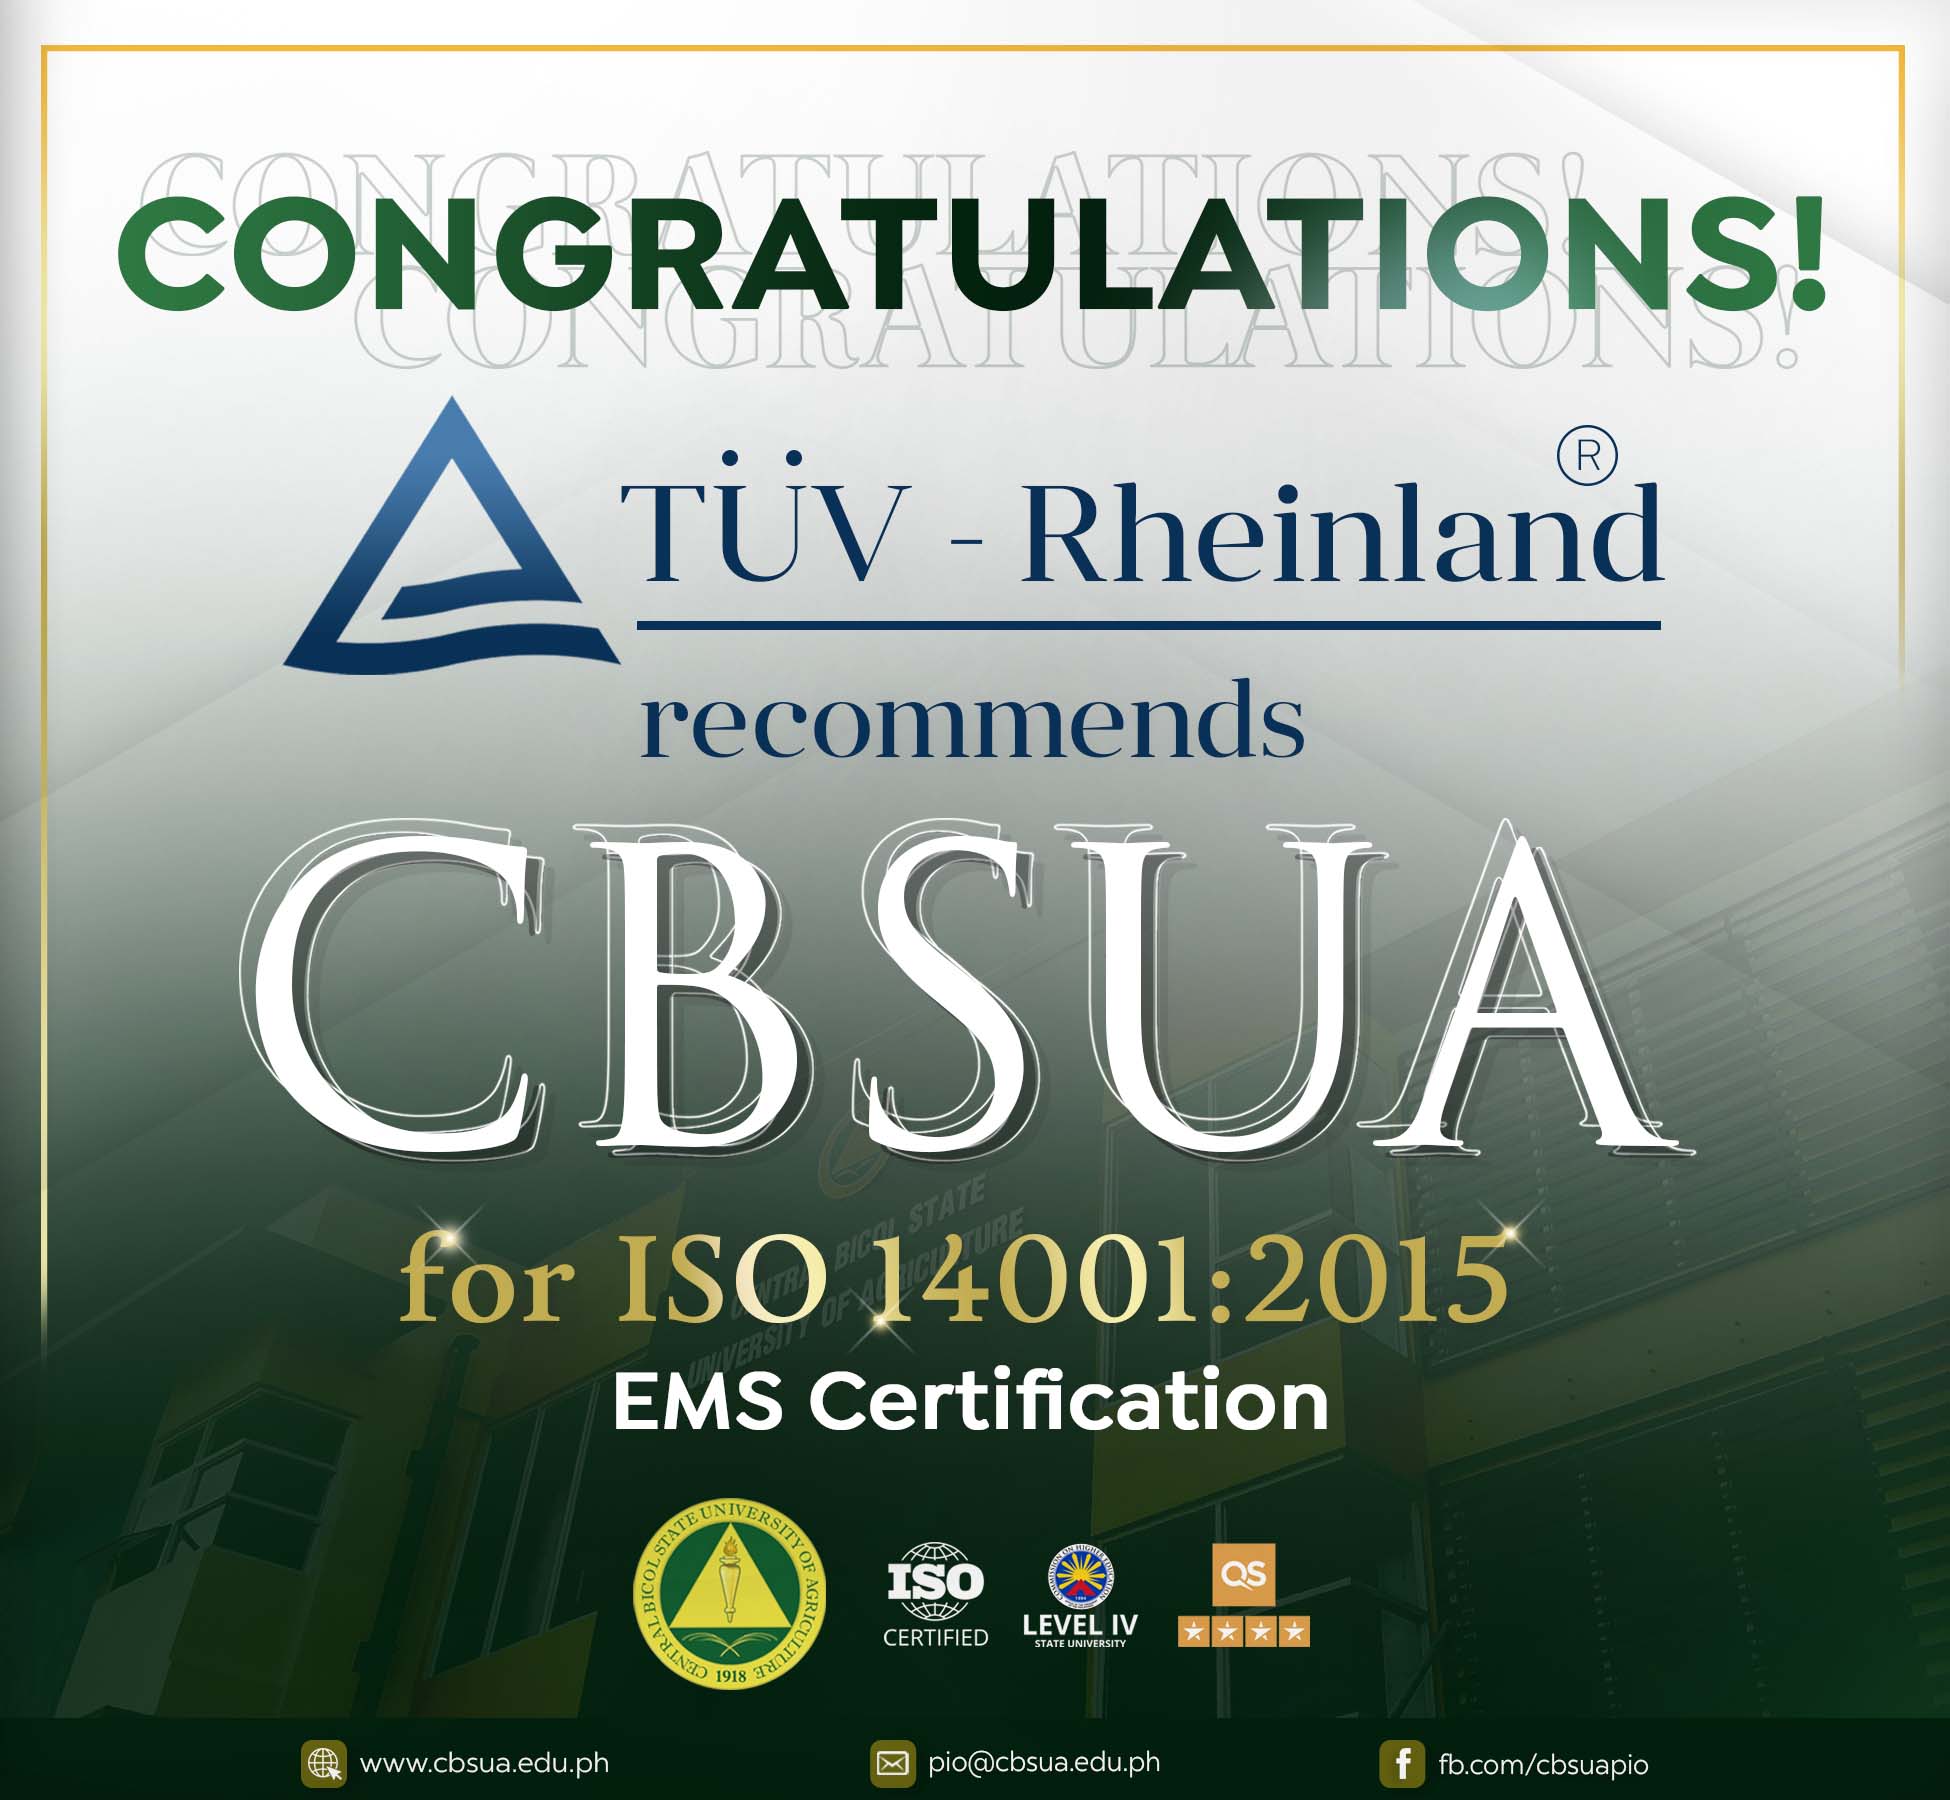 TÜV-RHEINLAND RECOMMENDS CBSUA FOR ISO 14001:2015-EMS